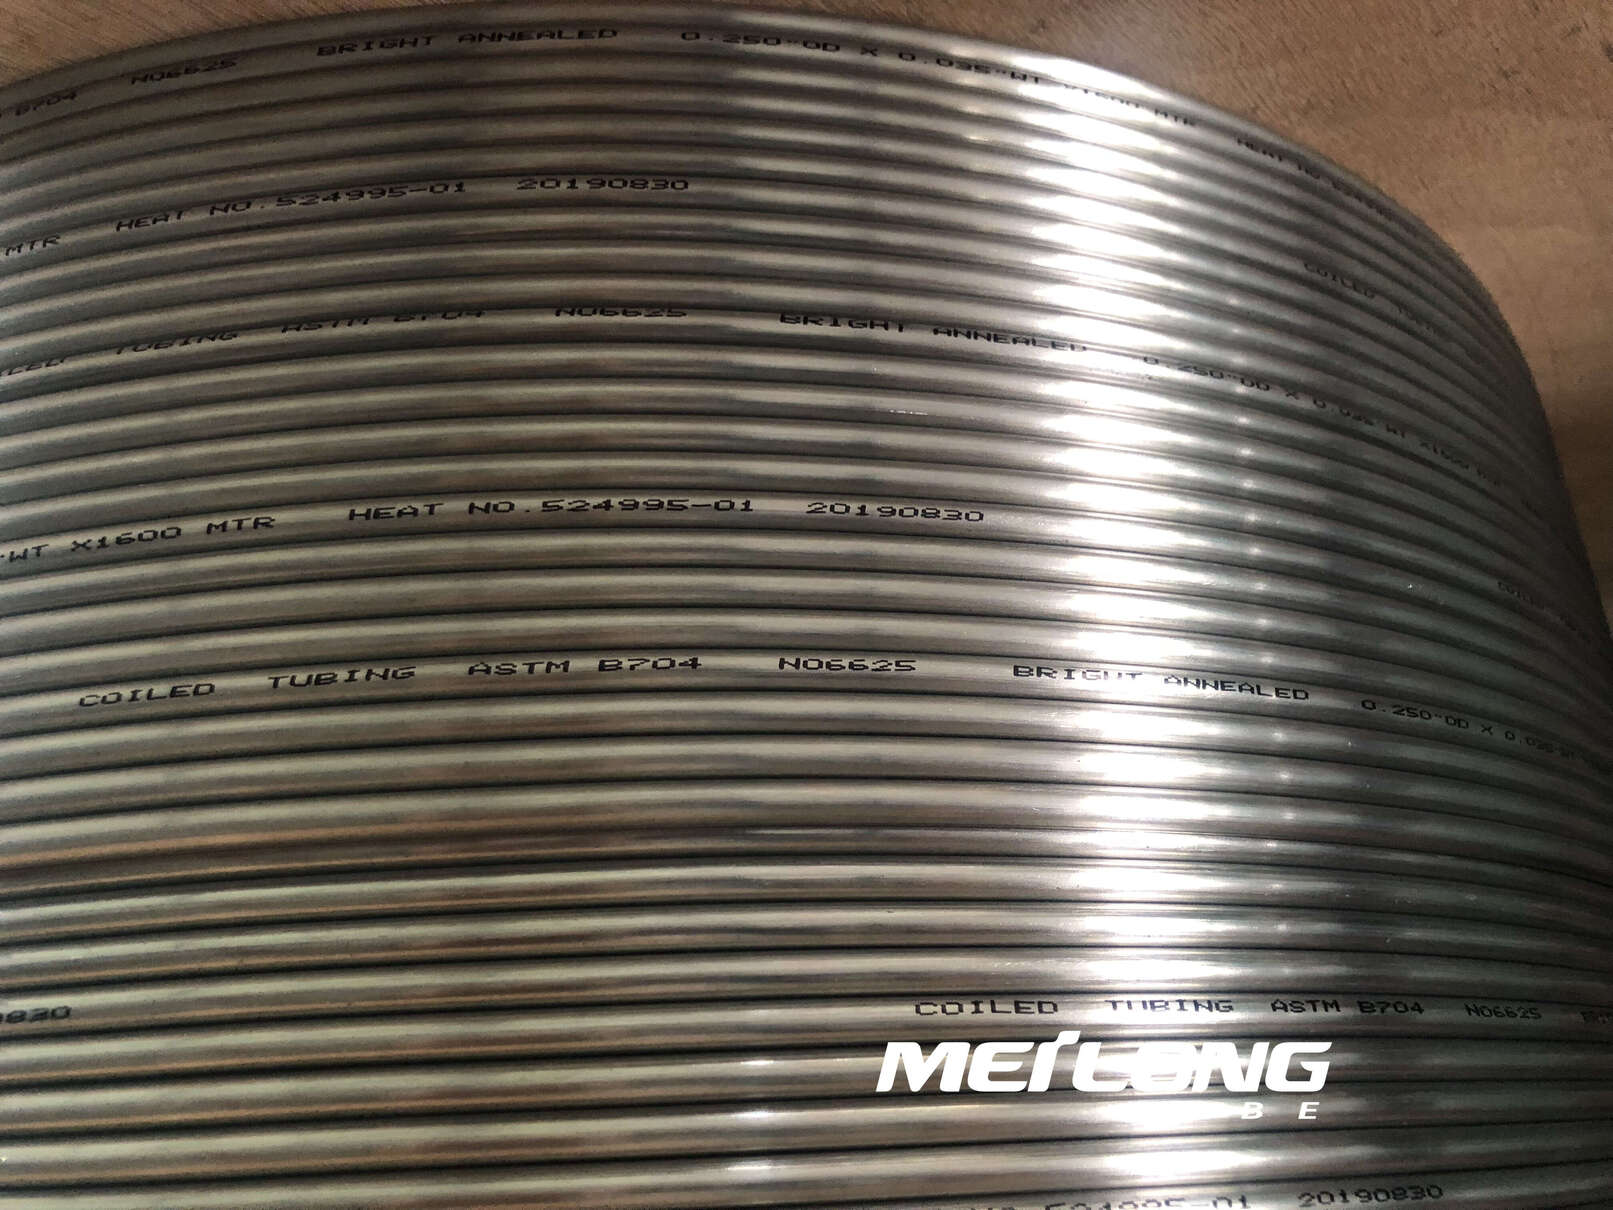 Stainless Steel Coiled Capillary Umbilical Tubing, China, Manufacturer